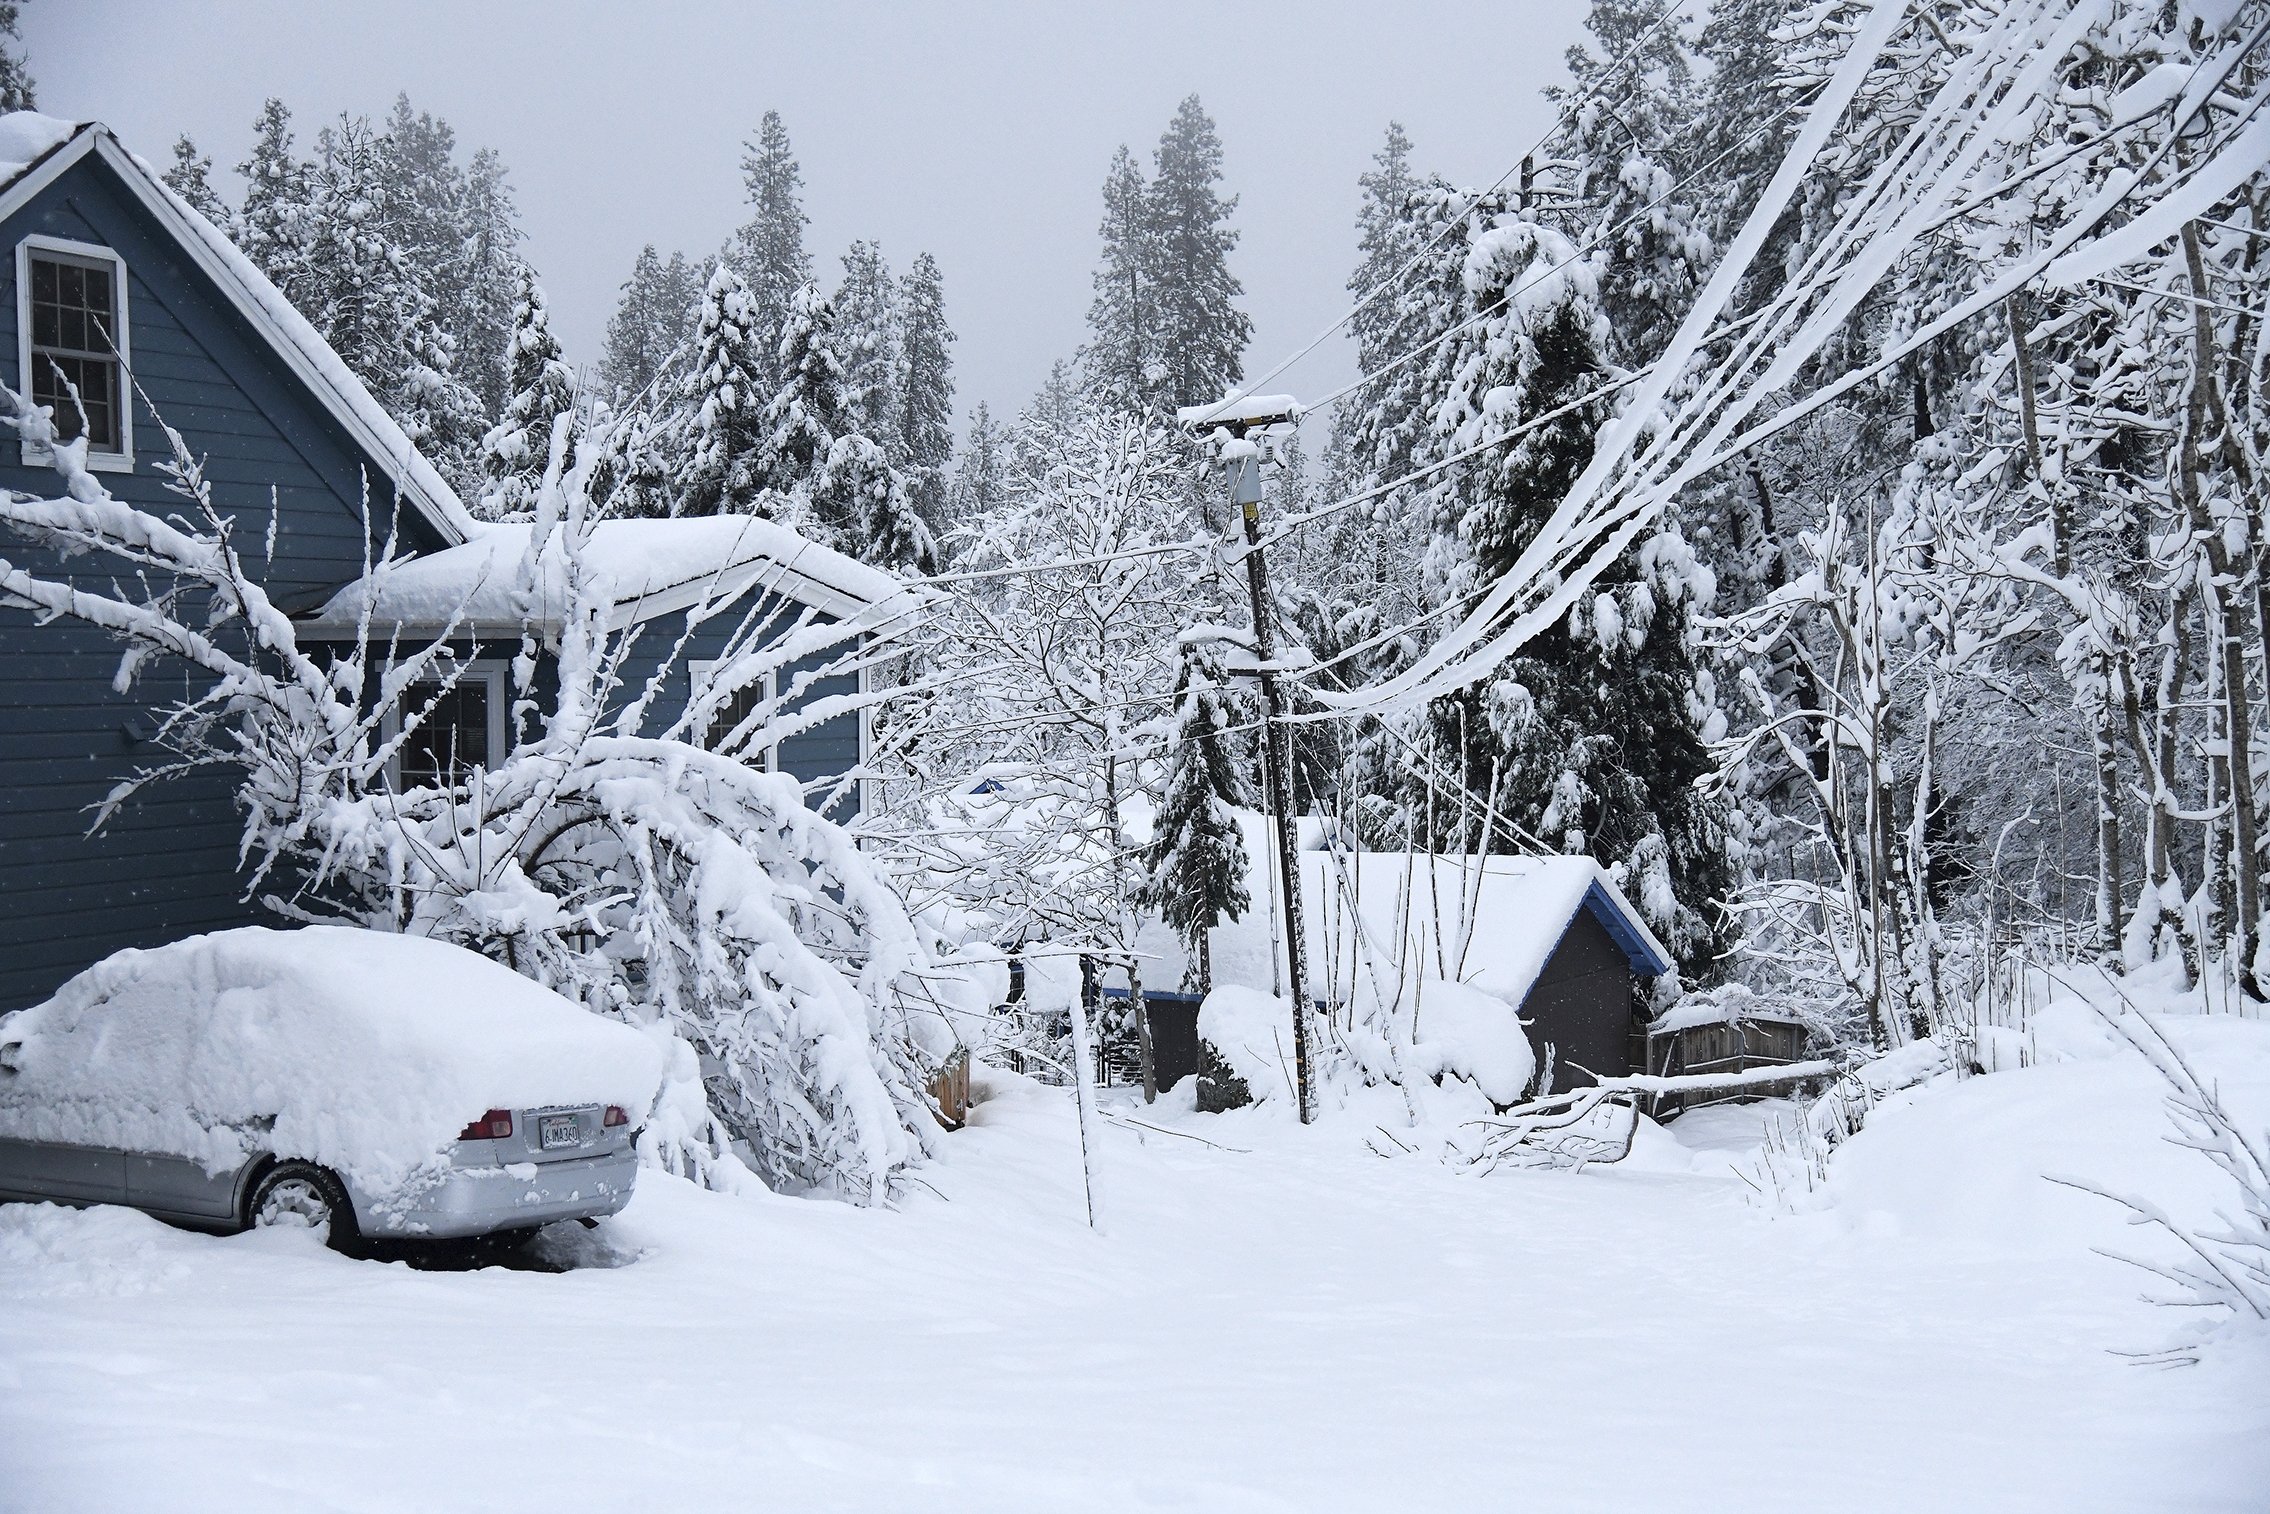 Spring Street in Nevada City, California was socked in with snow and downed tree limbs, U.S., Dec. 27, 2021. (AP Photo)